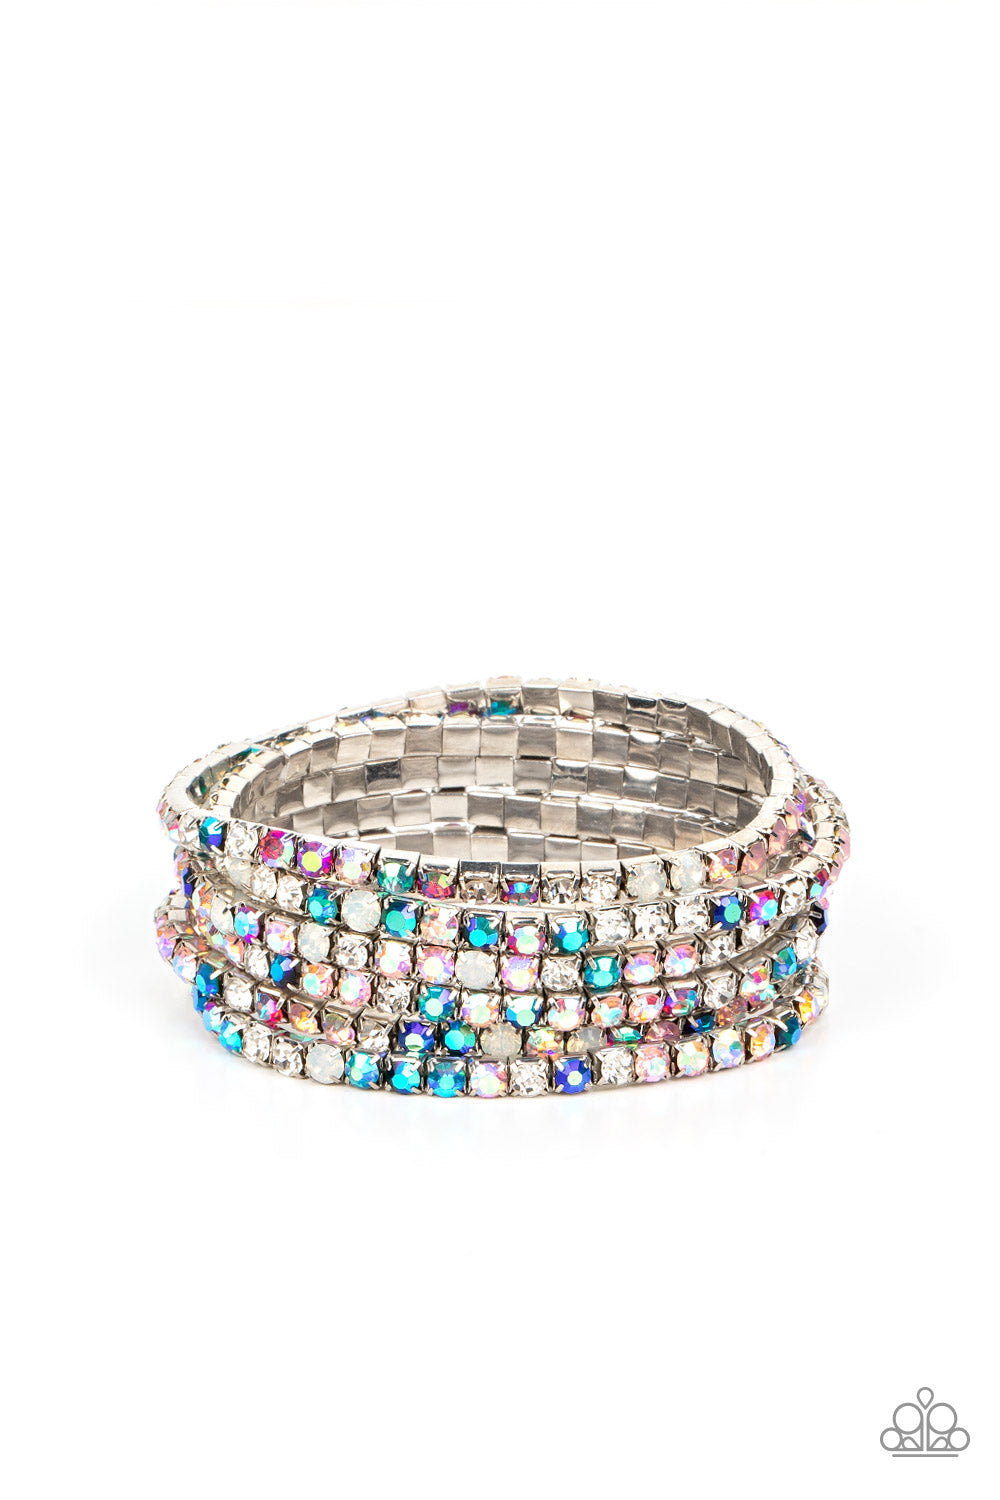 Rock Candy Rage - Multi Color Bracelet - Paparazzi Accessories - Embellished in rhinestone studs, six bracelets threaded along elastic stretchy bands stack across the wrist. Opalescent white, clear, and shades of iridescent in fuchsia, baby pink, and blues create a dramatic collision of color and shimmer. Due to its prismatic palette, color may vary. Sold as set of six bracelets.